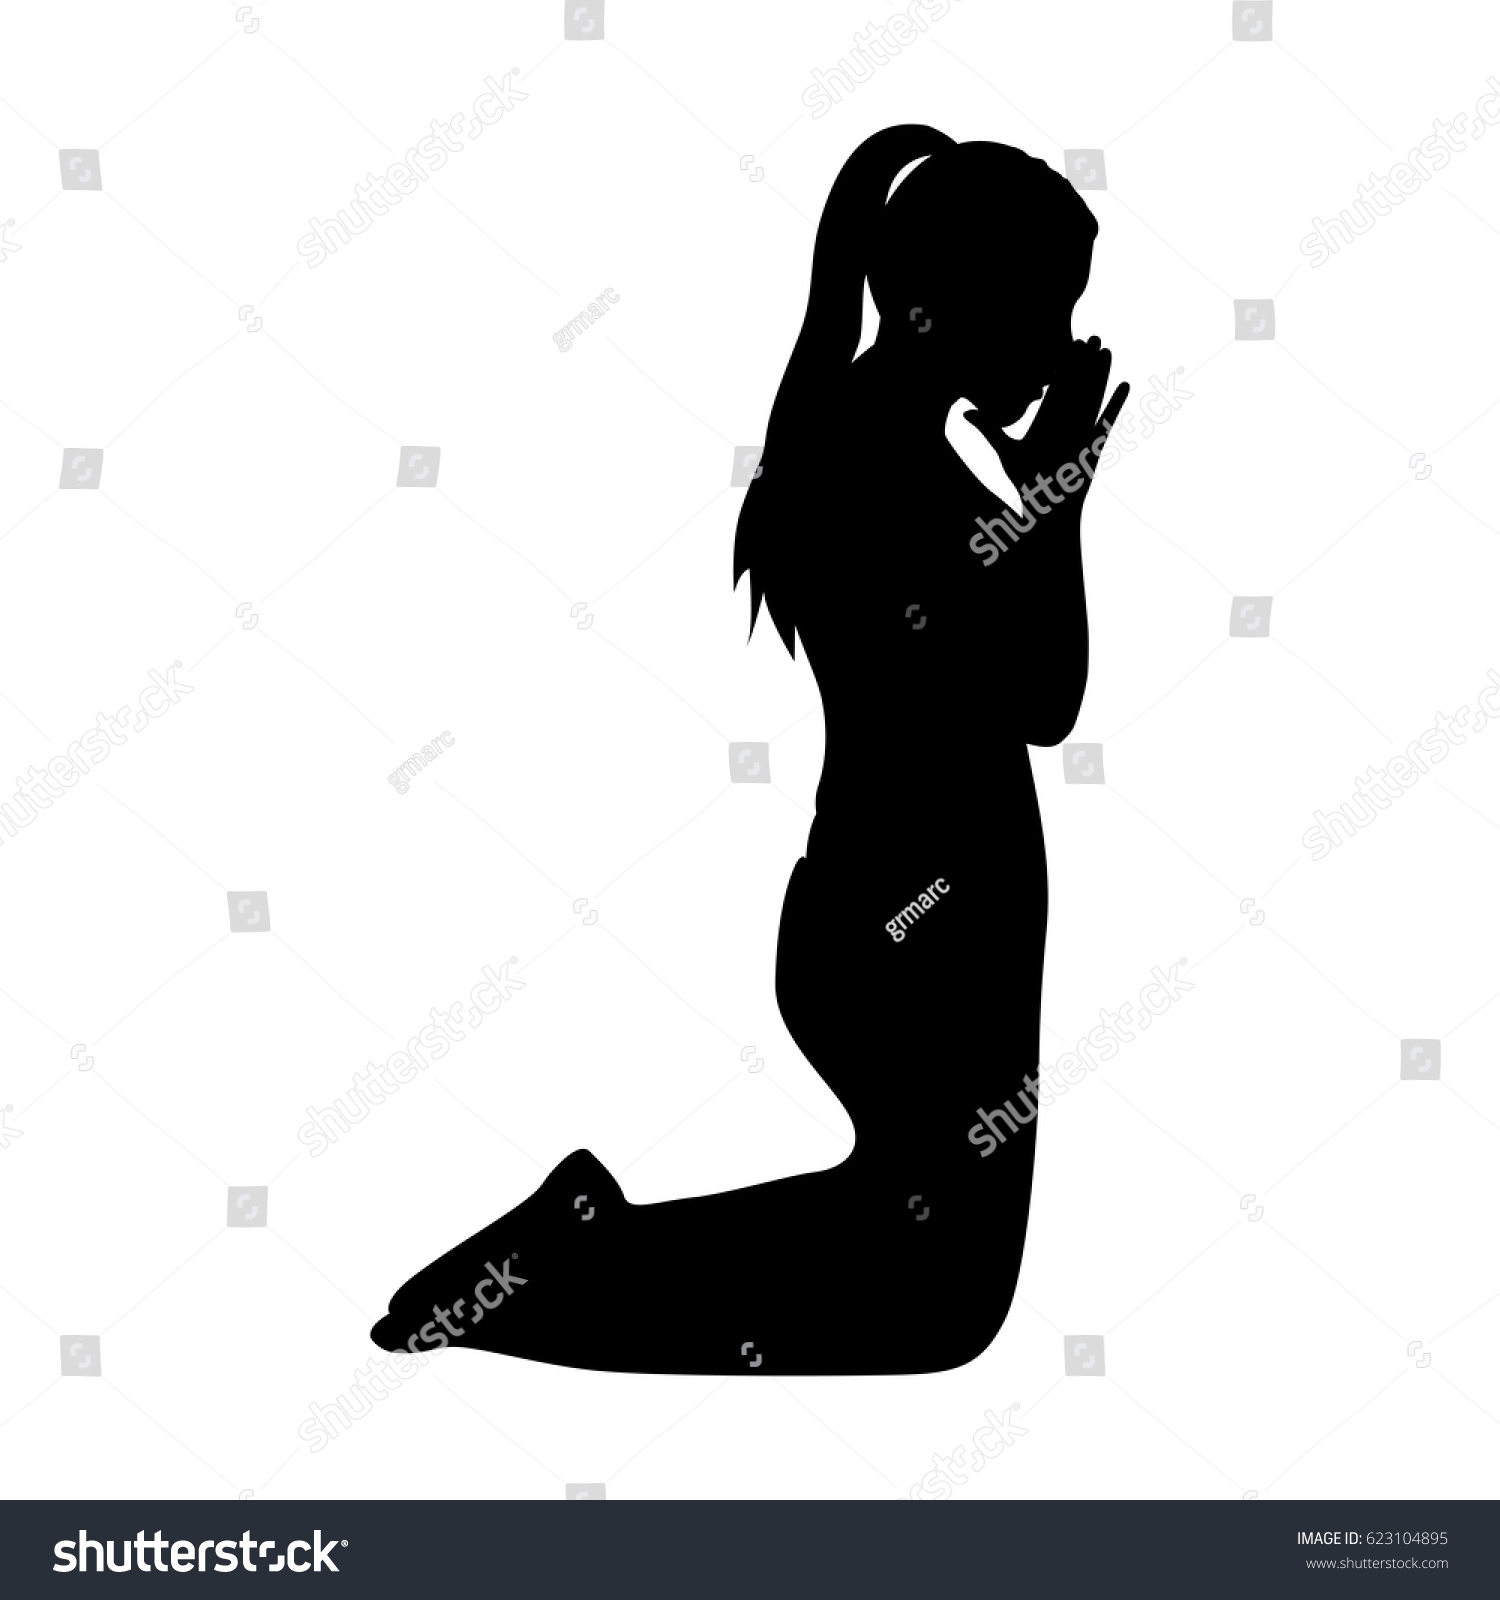 Monochrome Silhouette Woman Praying On His Stock Vector (Royalty Free ...